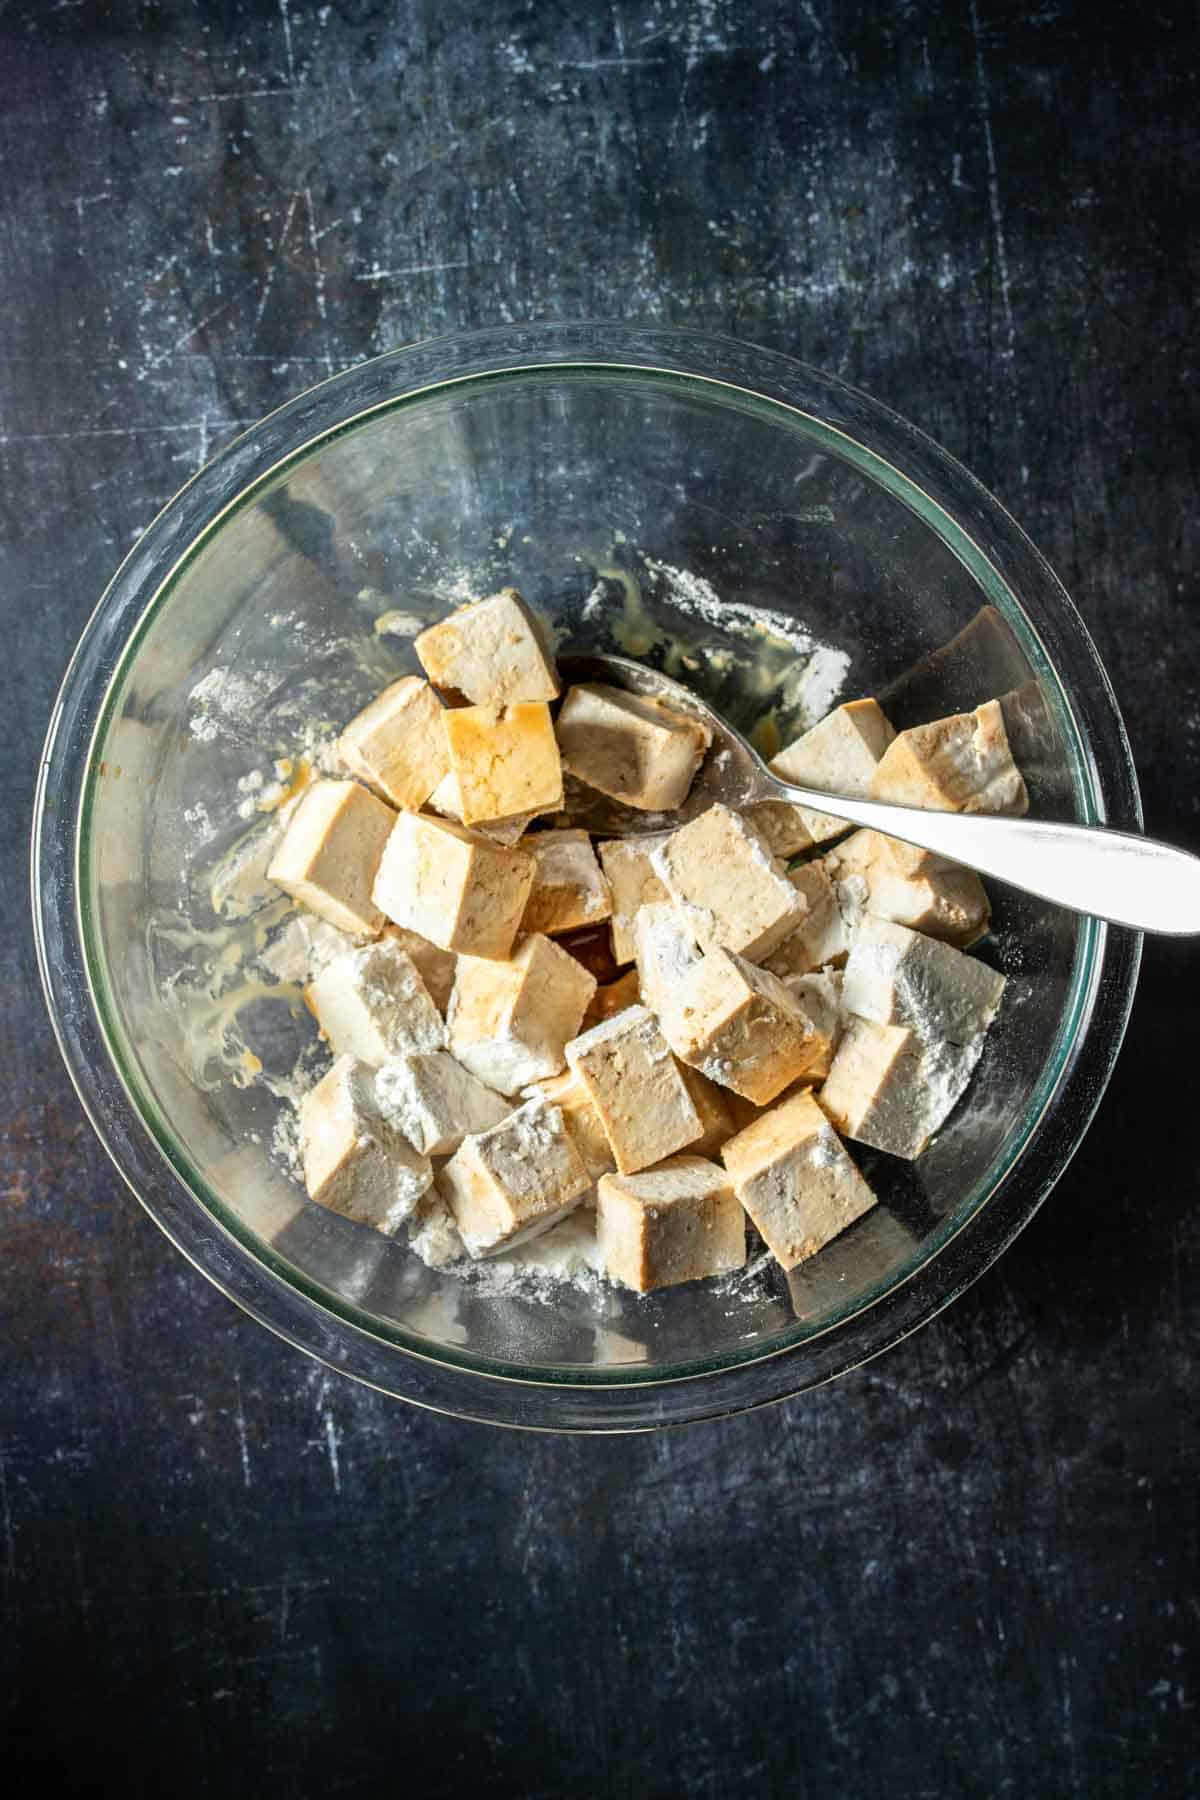 Spoon in a glass bowl of cut tofu pieces with cornstarch on them sitting on a dark surface.